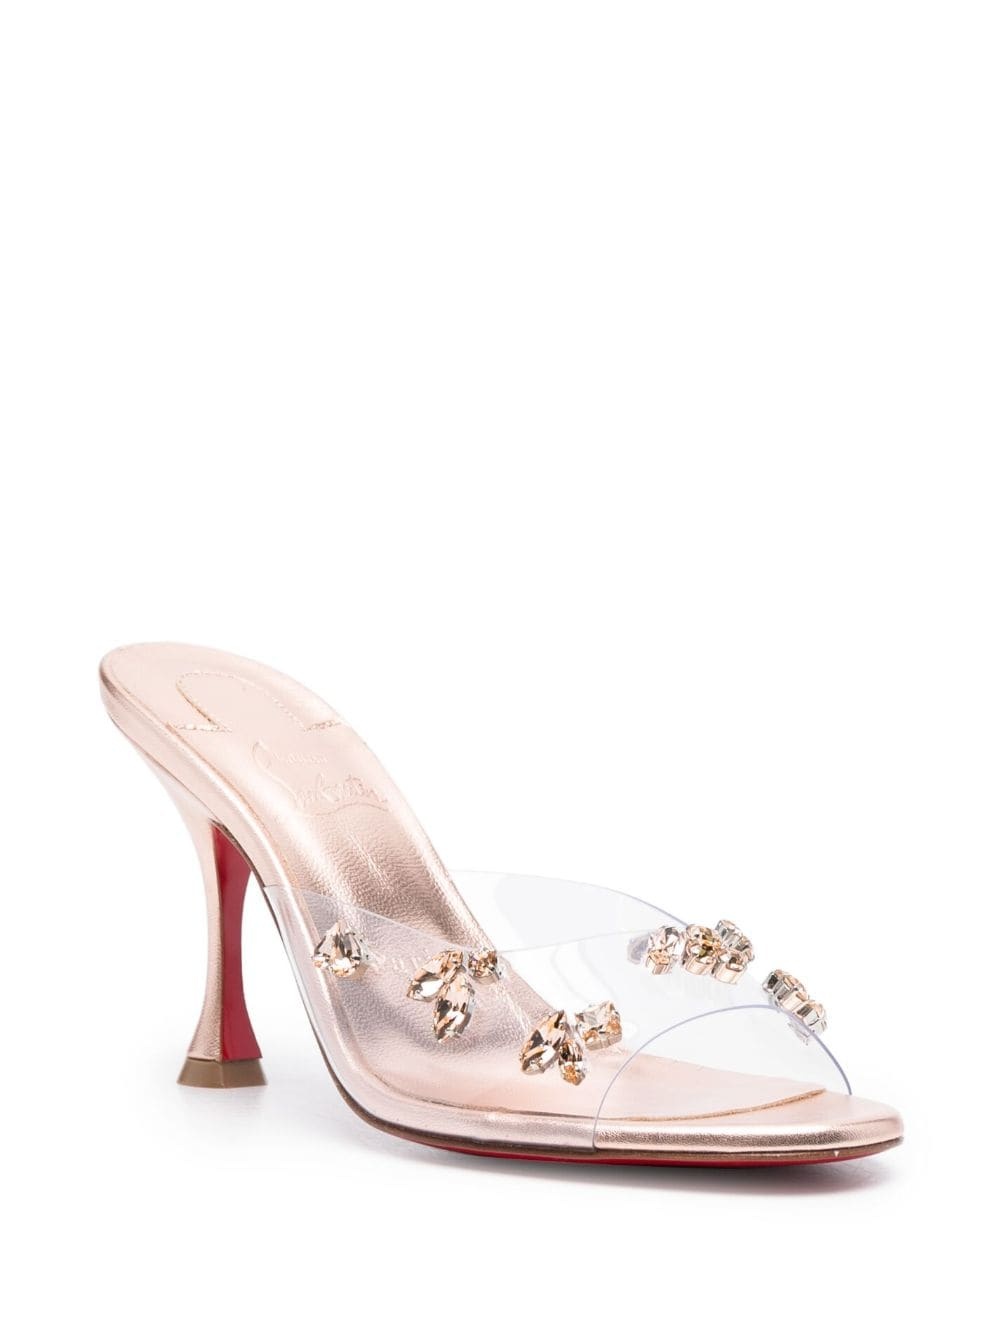 Degraqueen 85mm embellished mules - 2